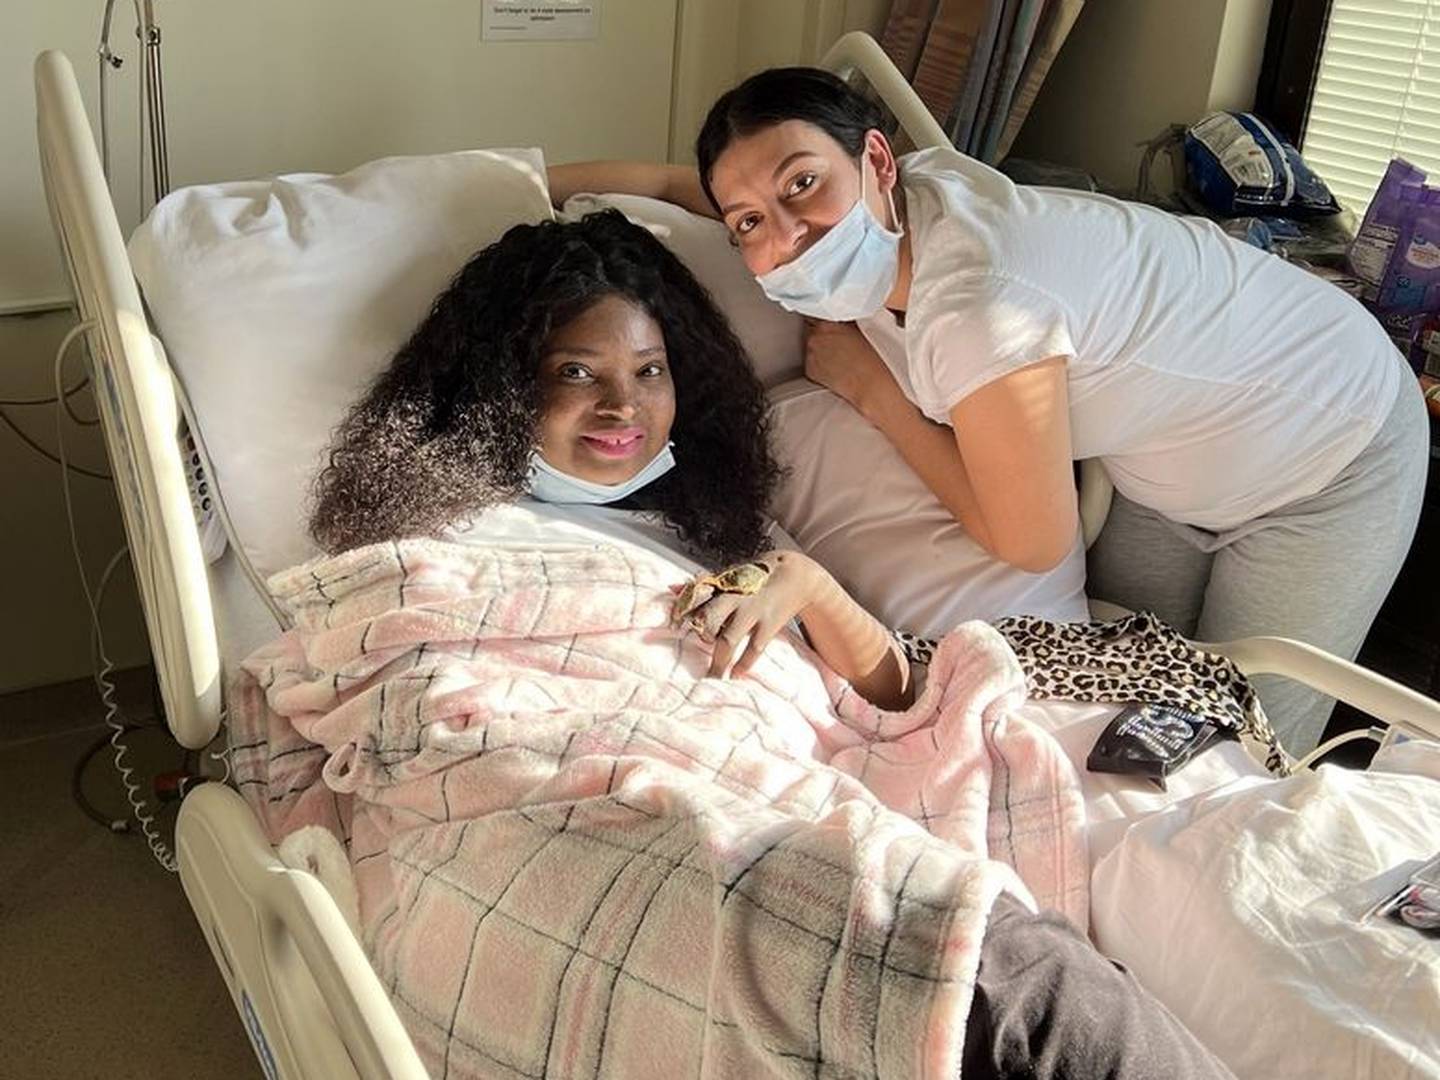 Shaquita Slaughter gets ready Thursday to leave Advocate Lutheran General Hospital with help from sister-in-law Isamar Barraza after months battling COVID-19.